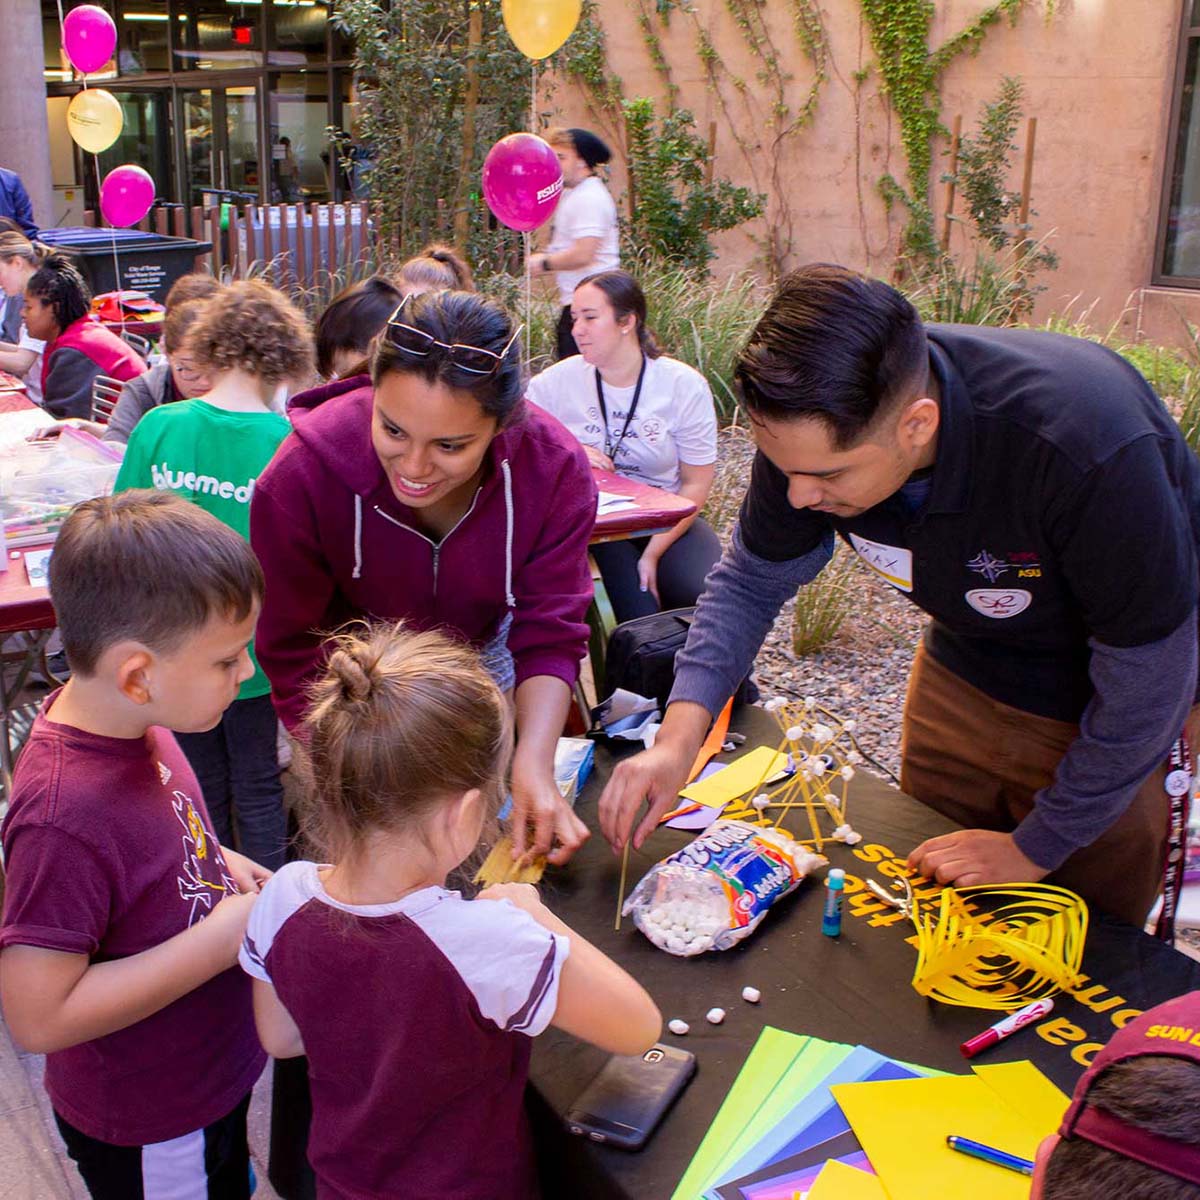 Members of the Society of Hispanic Professional Engineers (SHPE) help kids do a project at their activity table during ASU Open Door